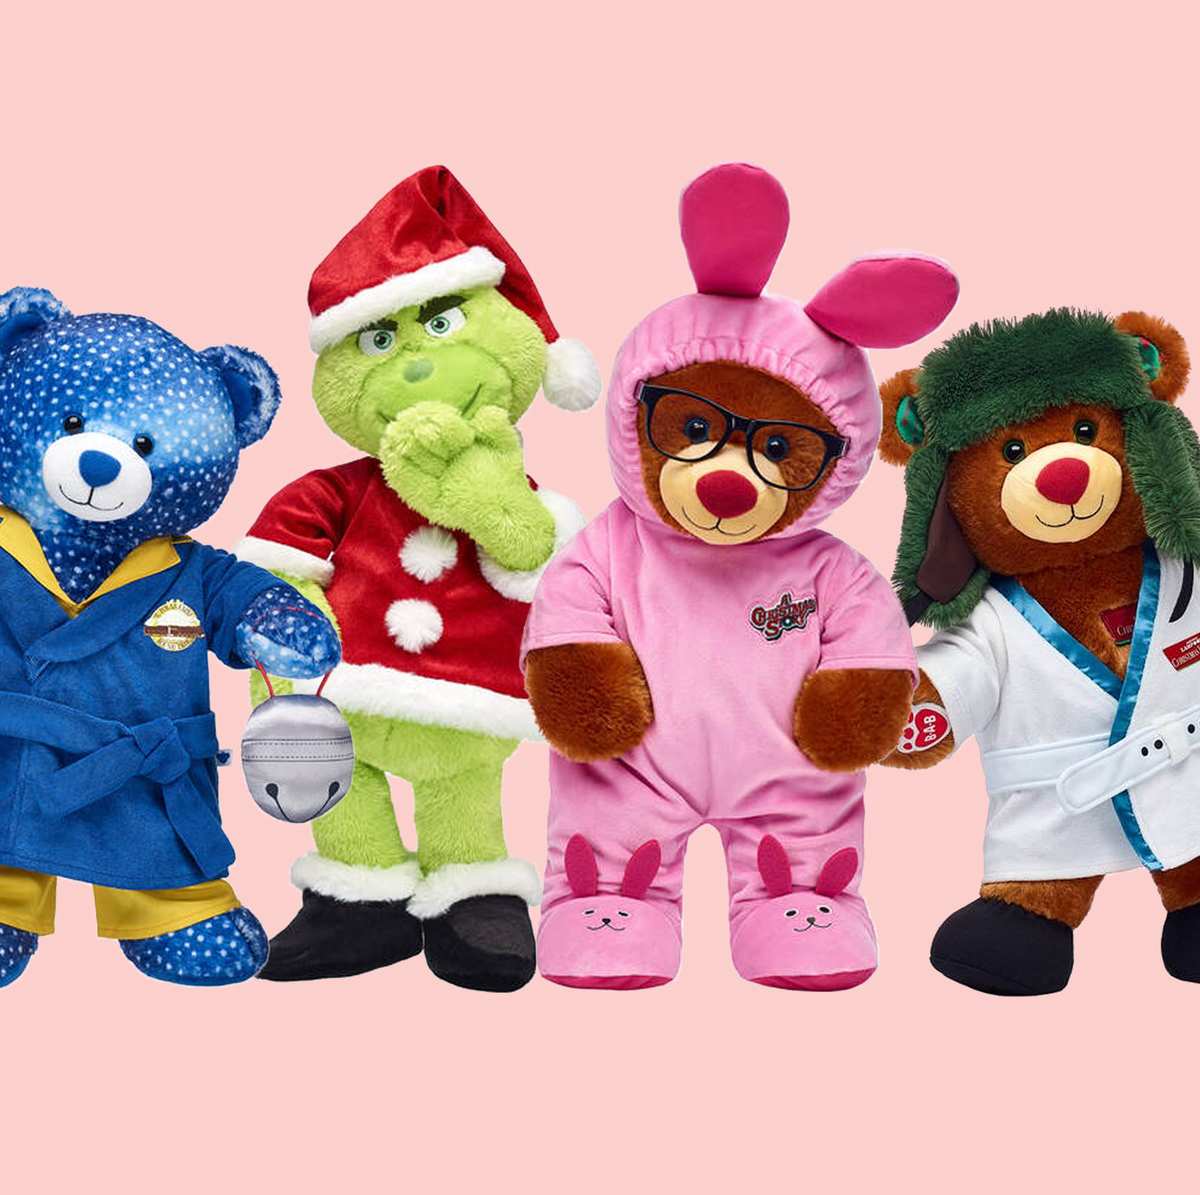 Build-a-Bear Christmas Movie Bears - Cousin Eddie, Ralphie, the Grinch, and  More